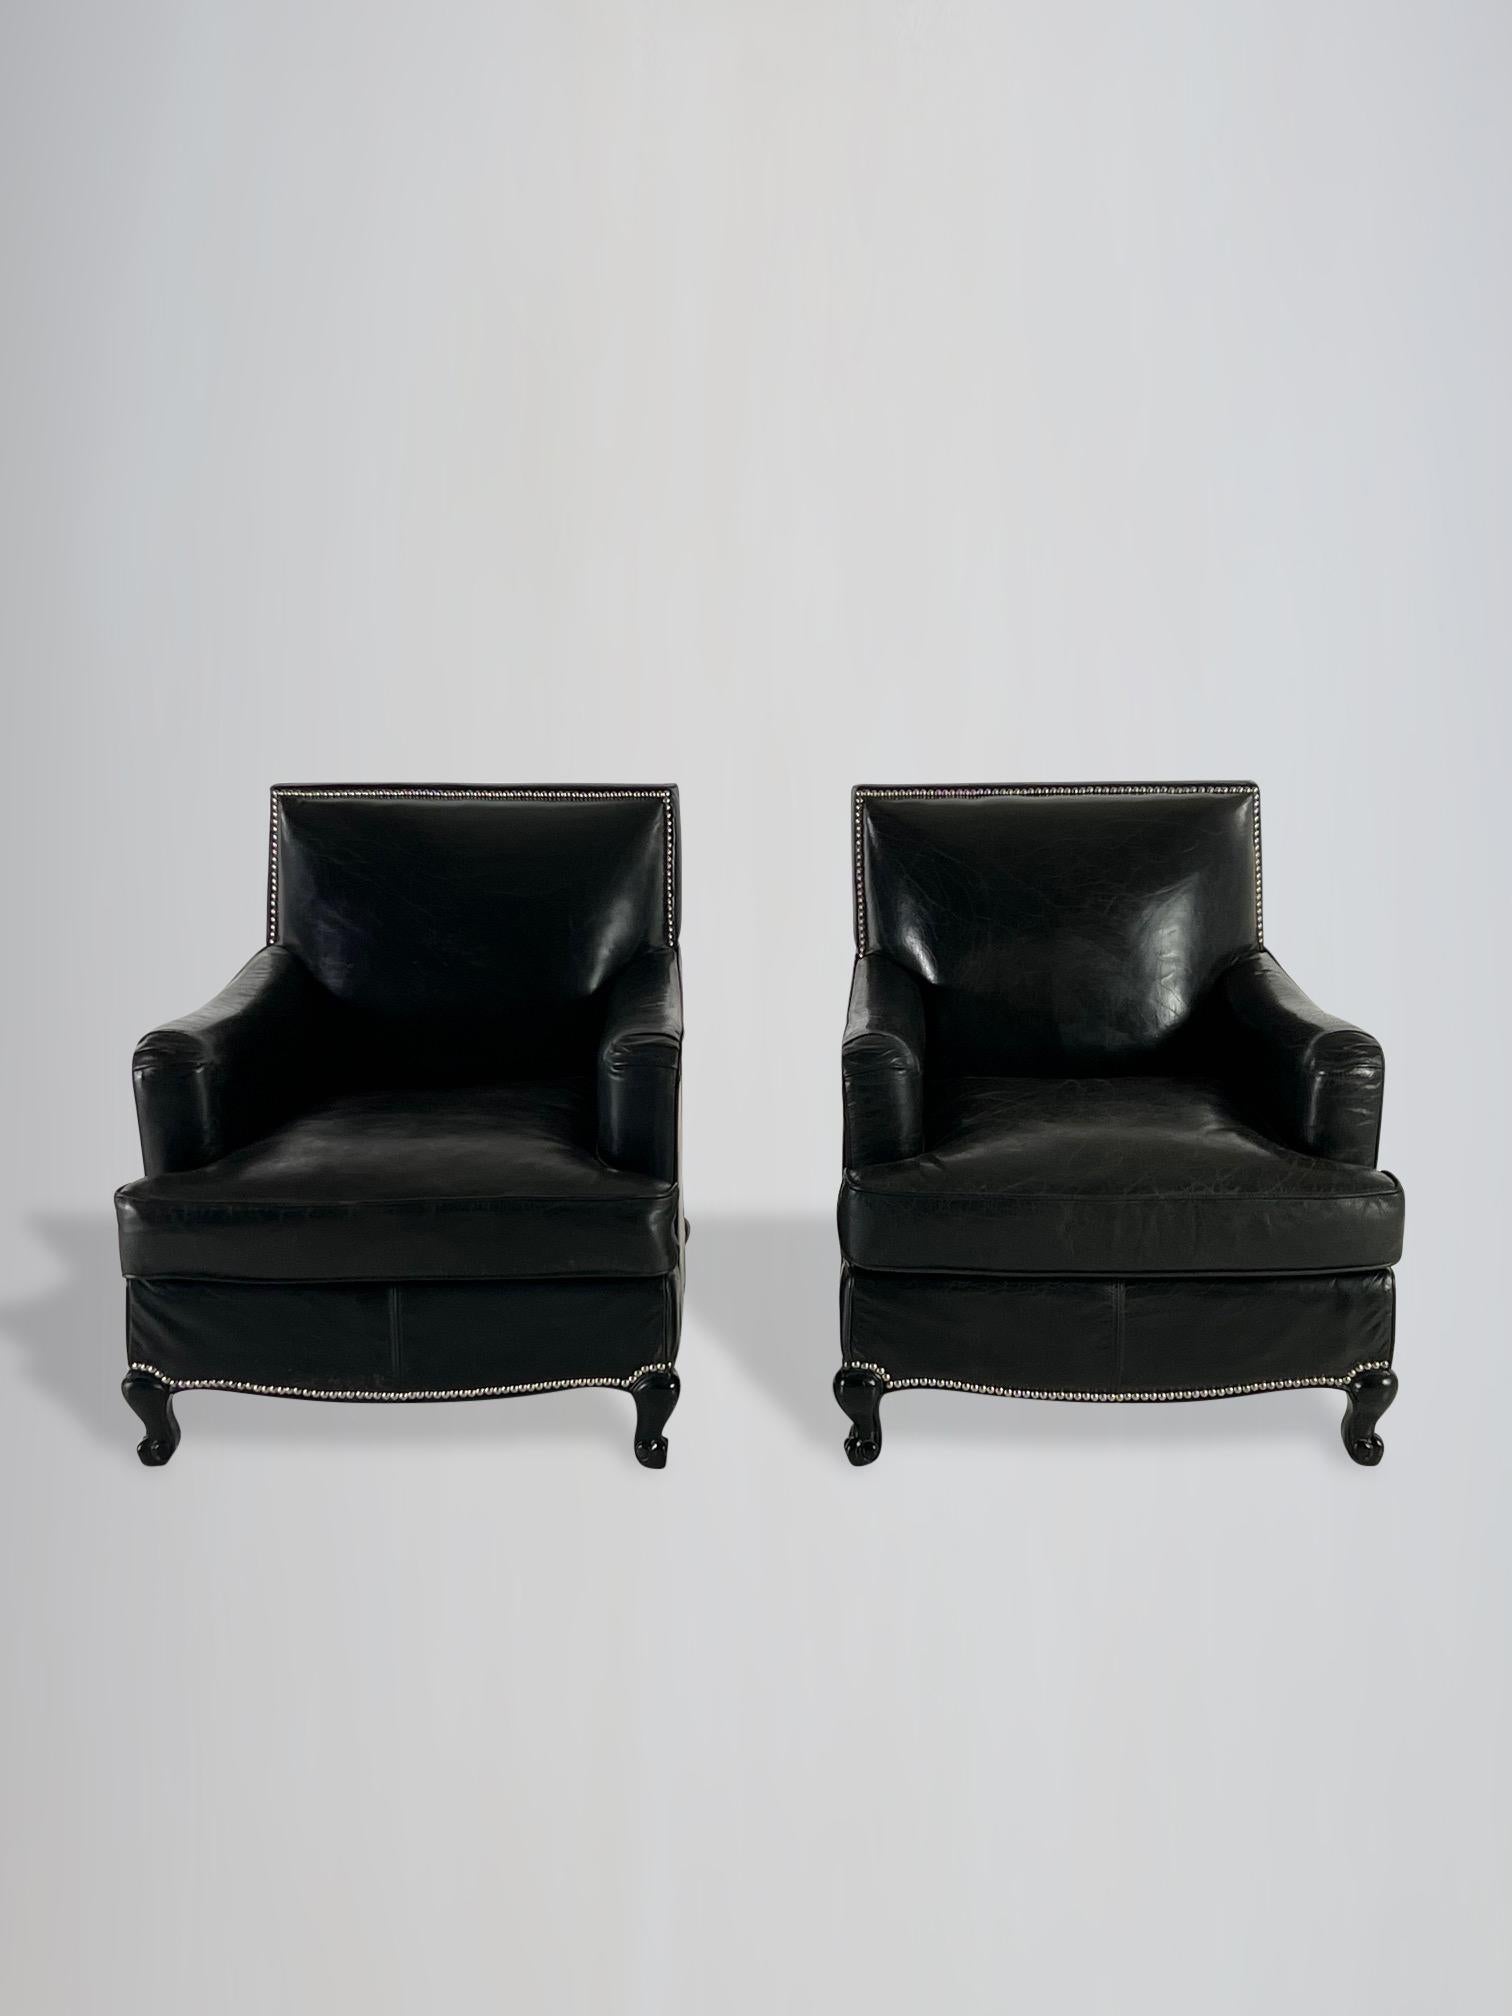 French Provincial Stunning Pair of French Black Leather Club Armchairs For Sale